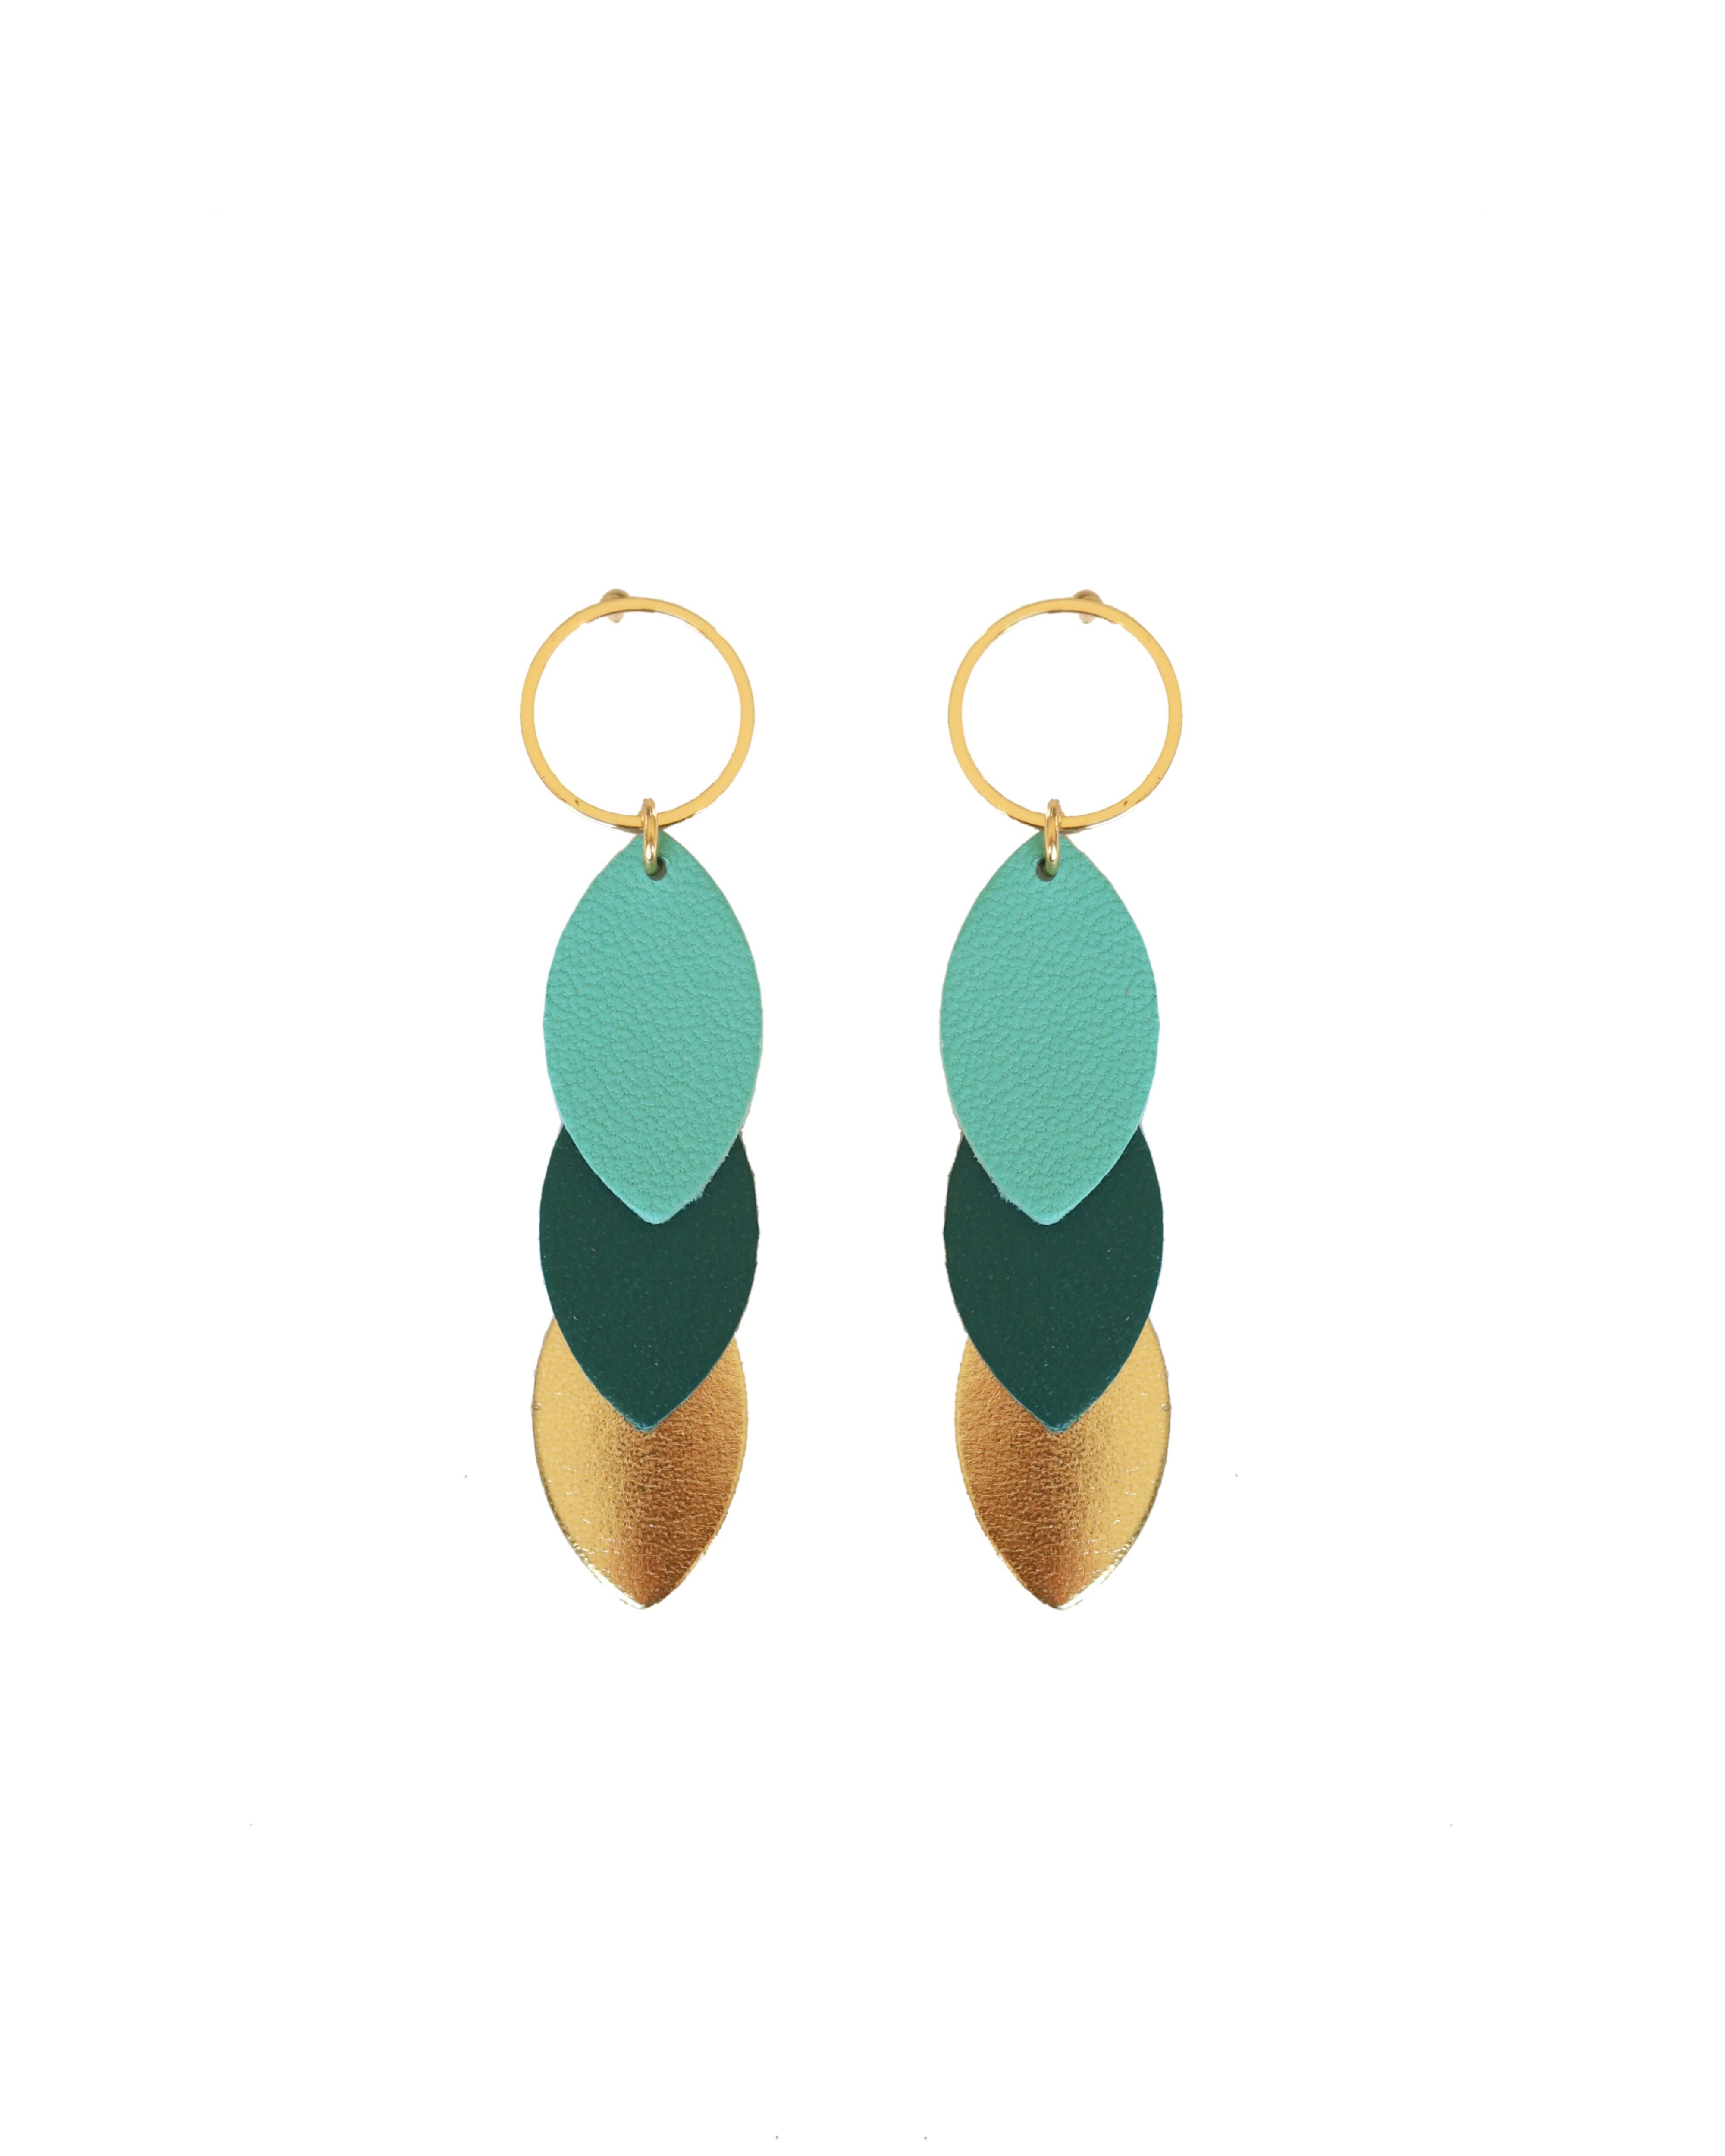 Wholesale earrings for retailers | Ankorstore